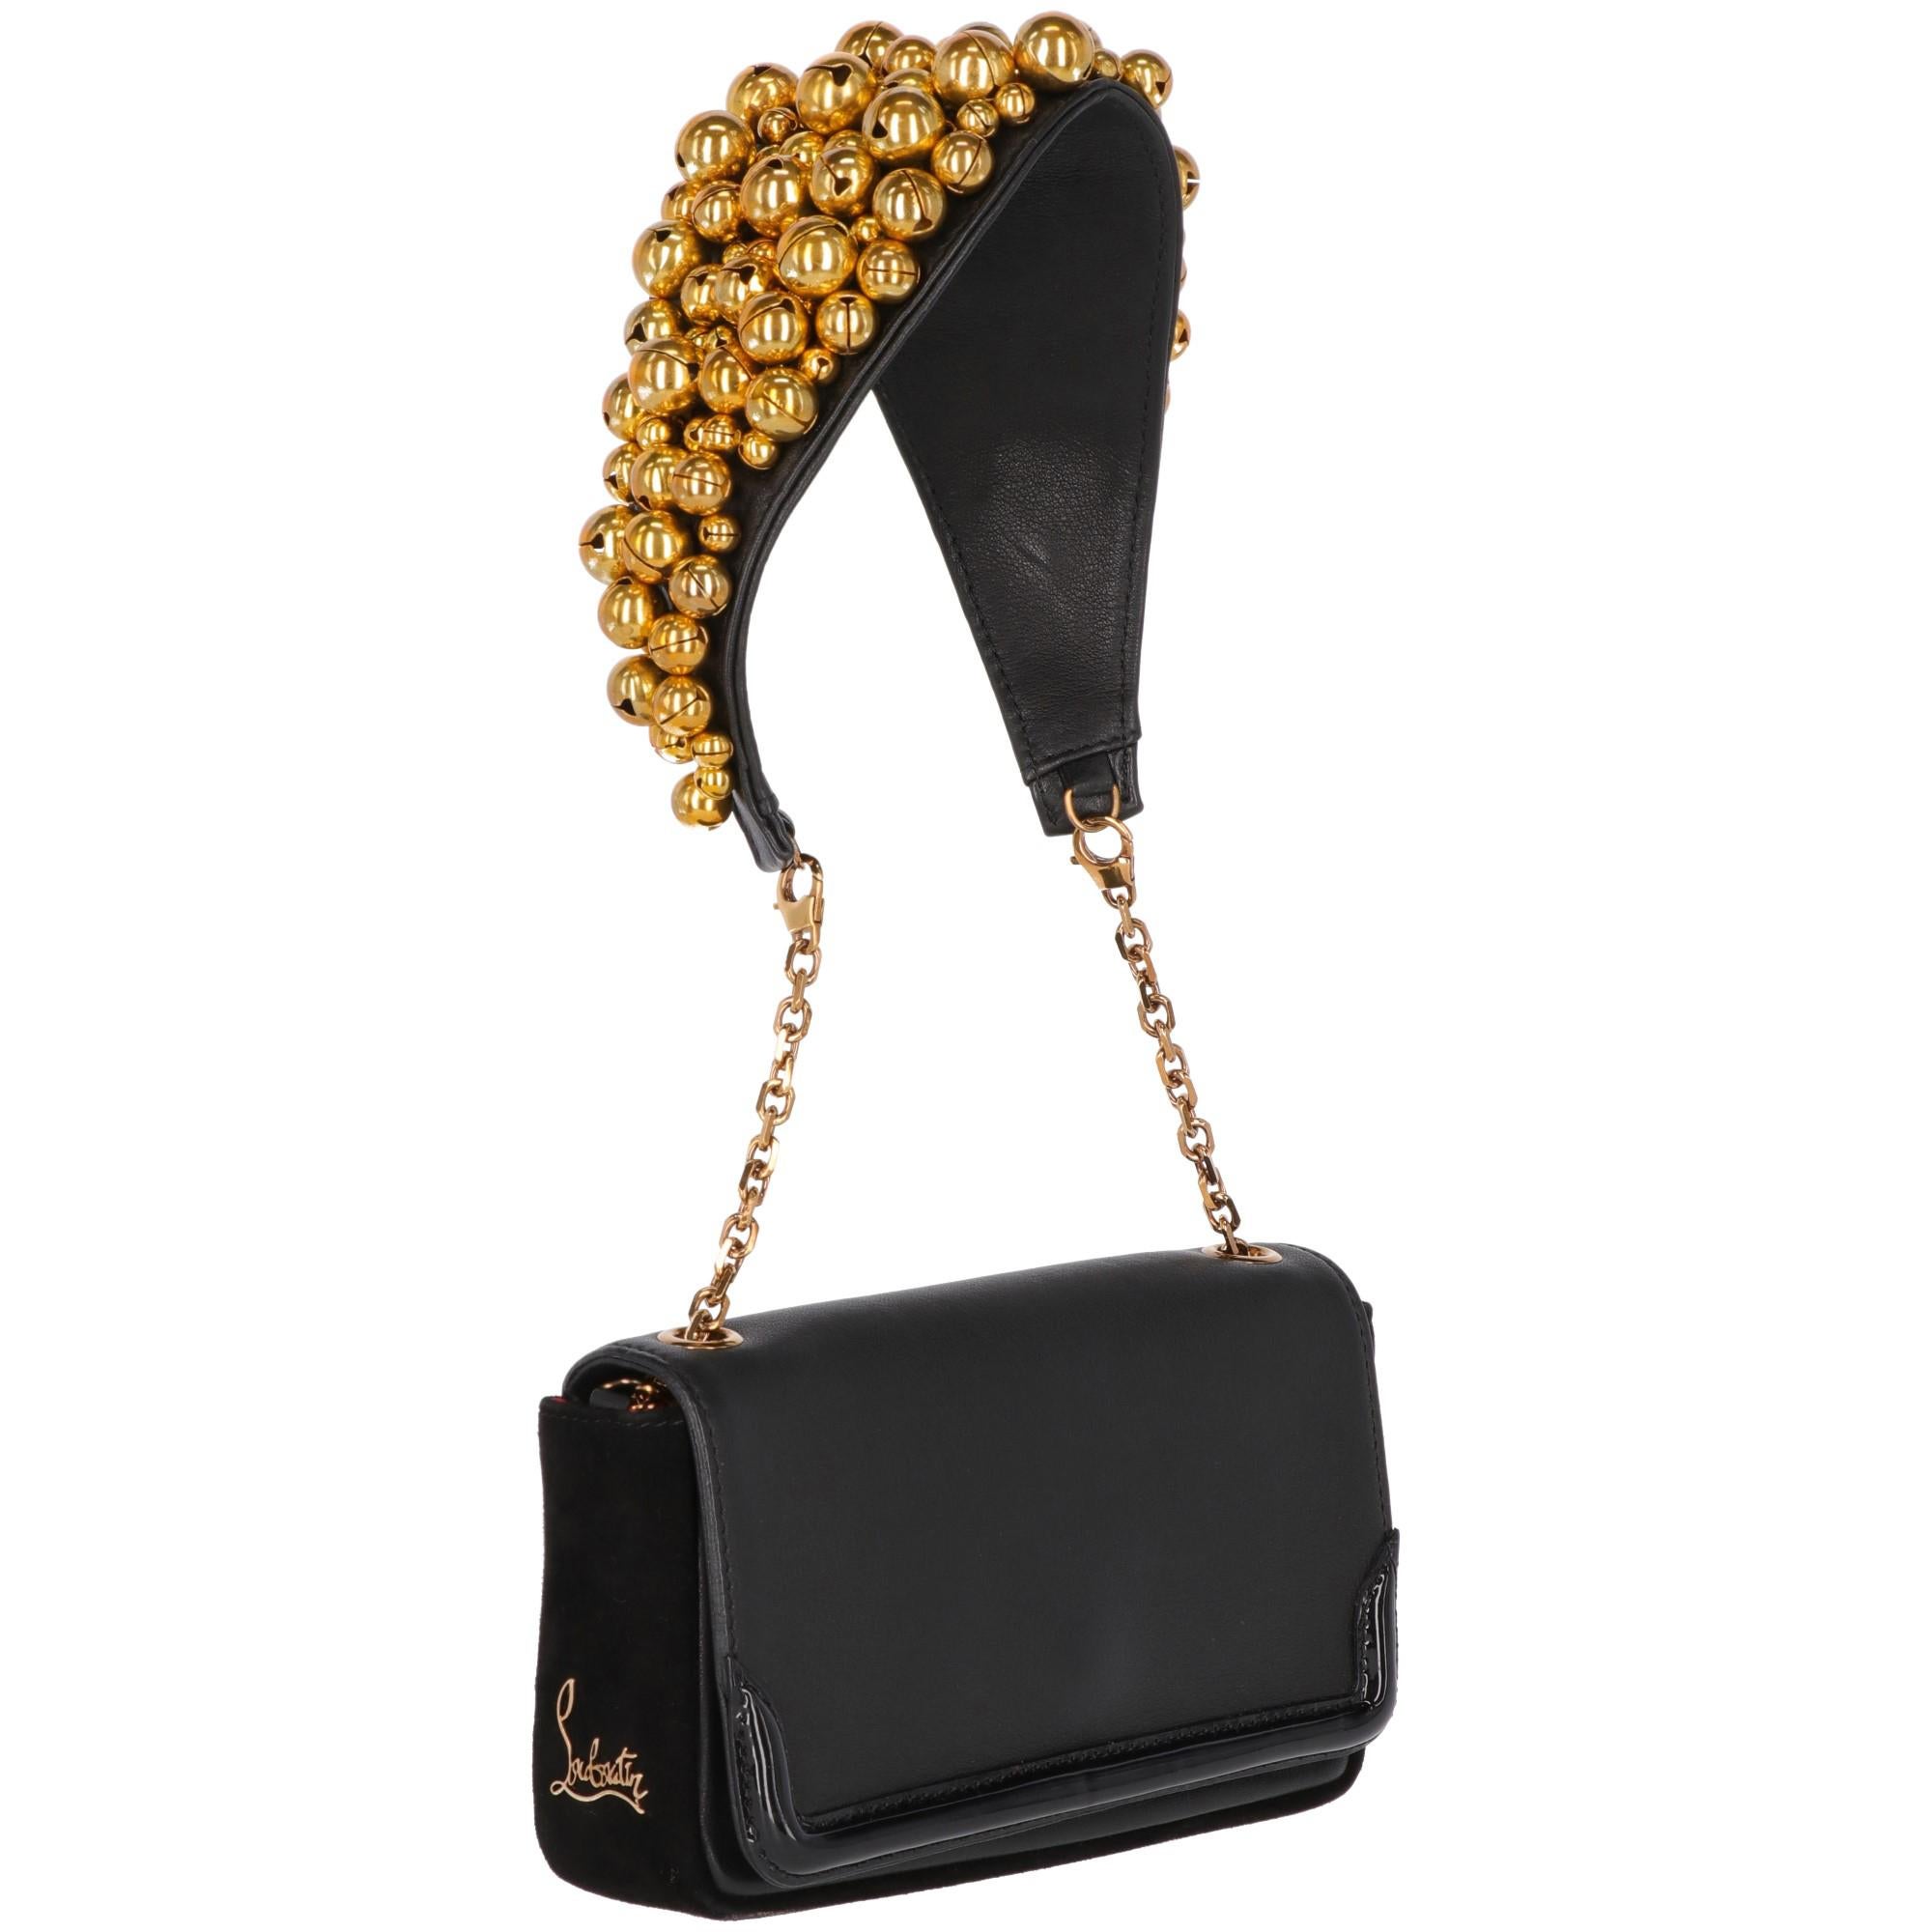 The stylish Artemis Clochettes shoulder bag by Christian Louboutin, is in black calf leather with suede and patent leather inserts. The shoulder strap is in golden chain with a leather insert embellished by golden metal small bells. The Louboutin